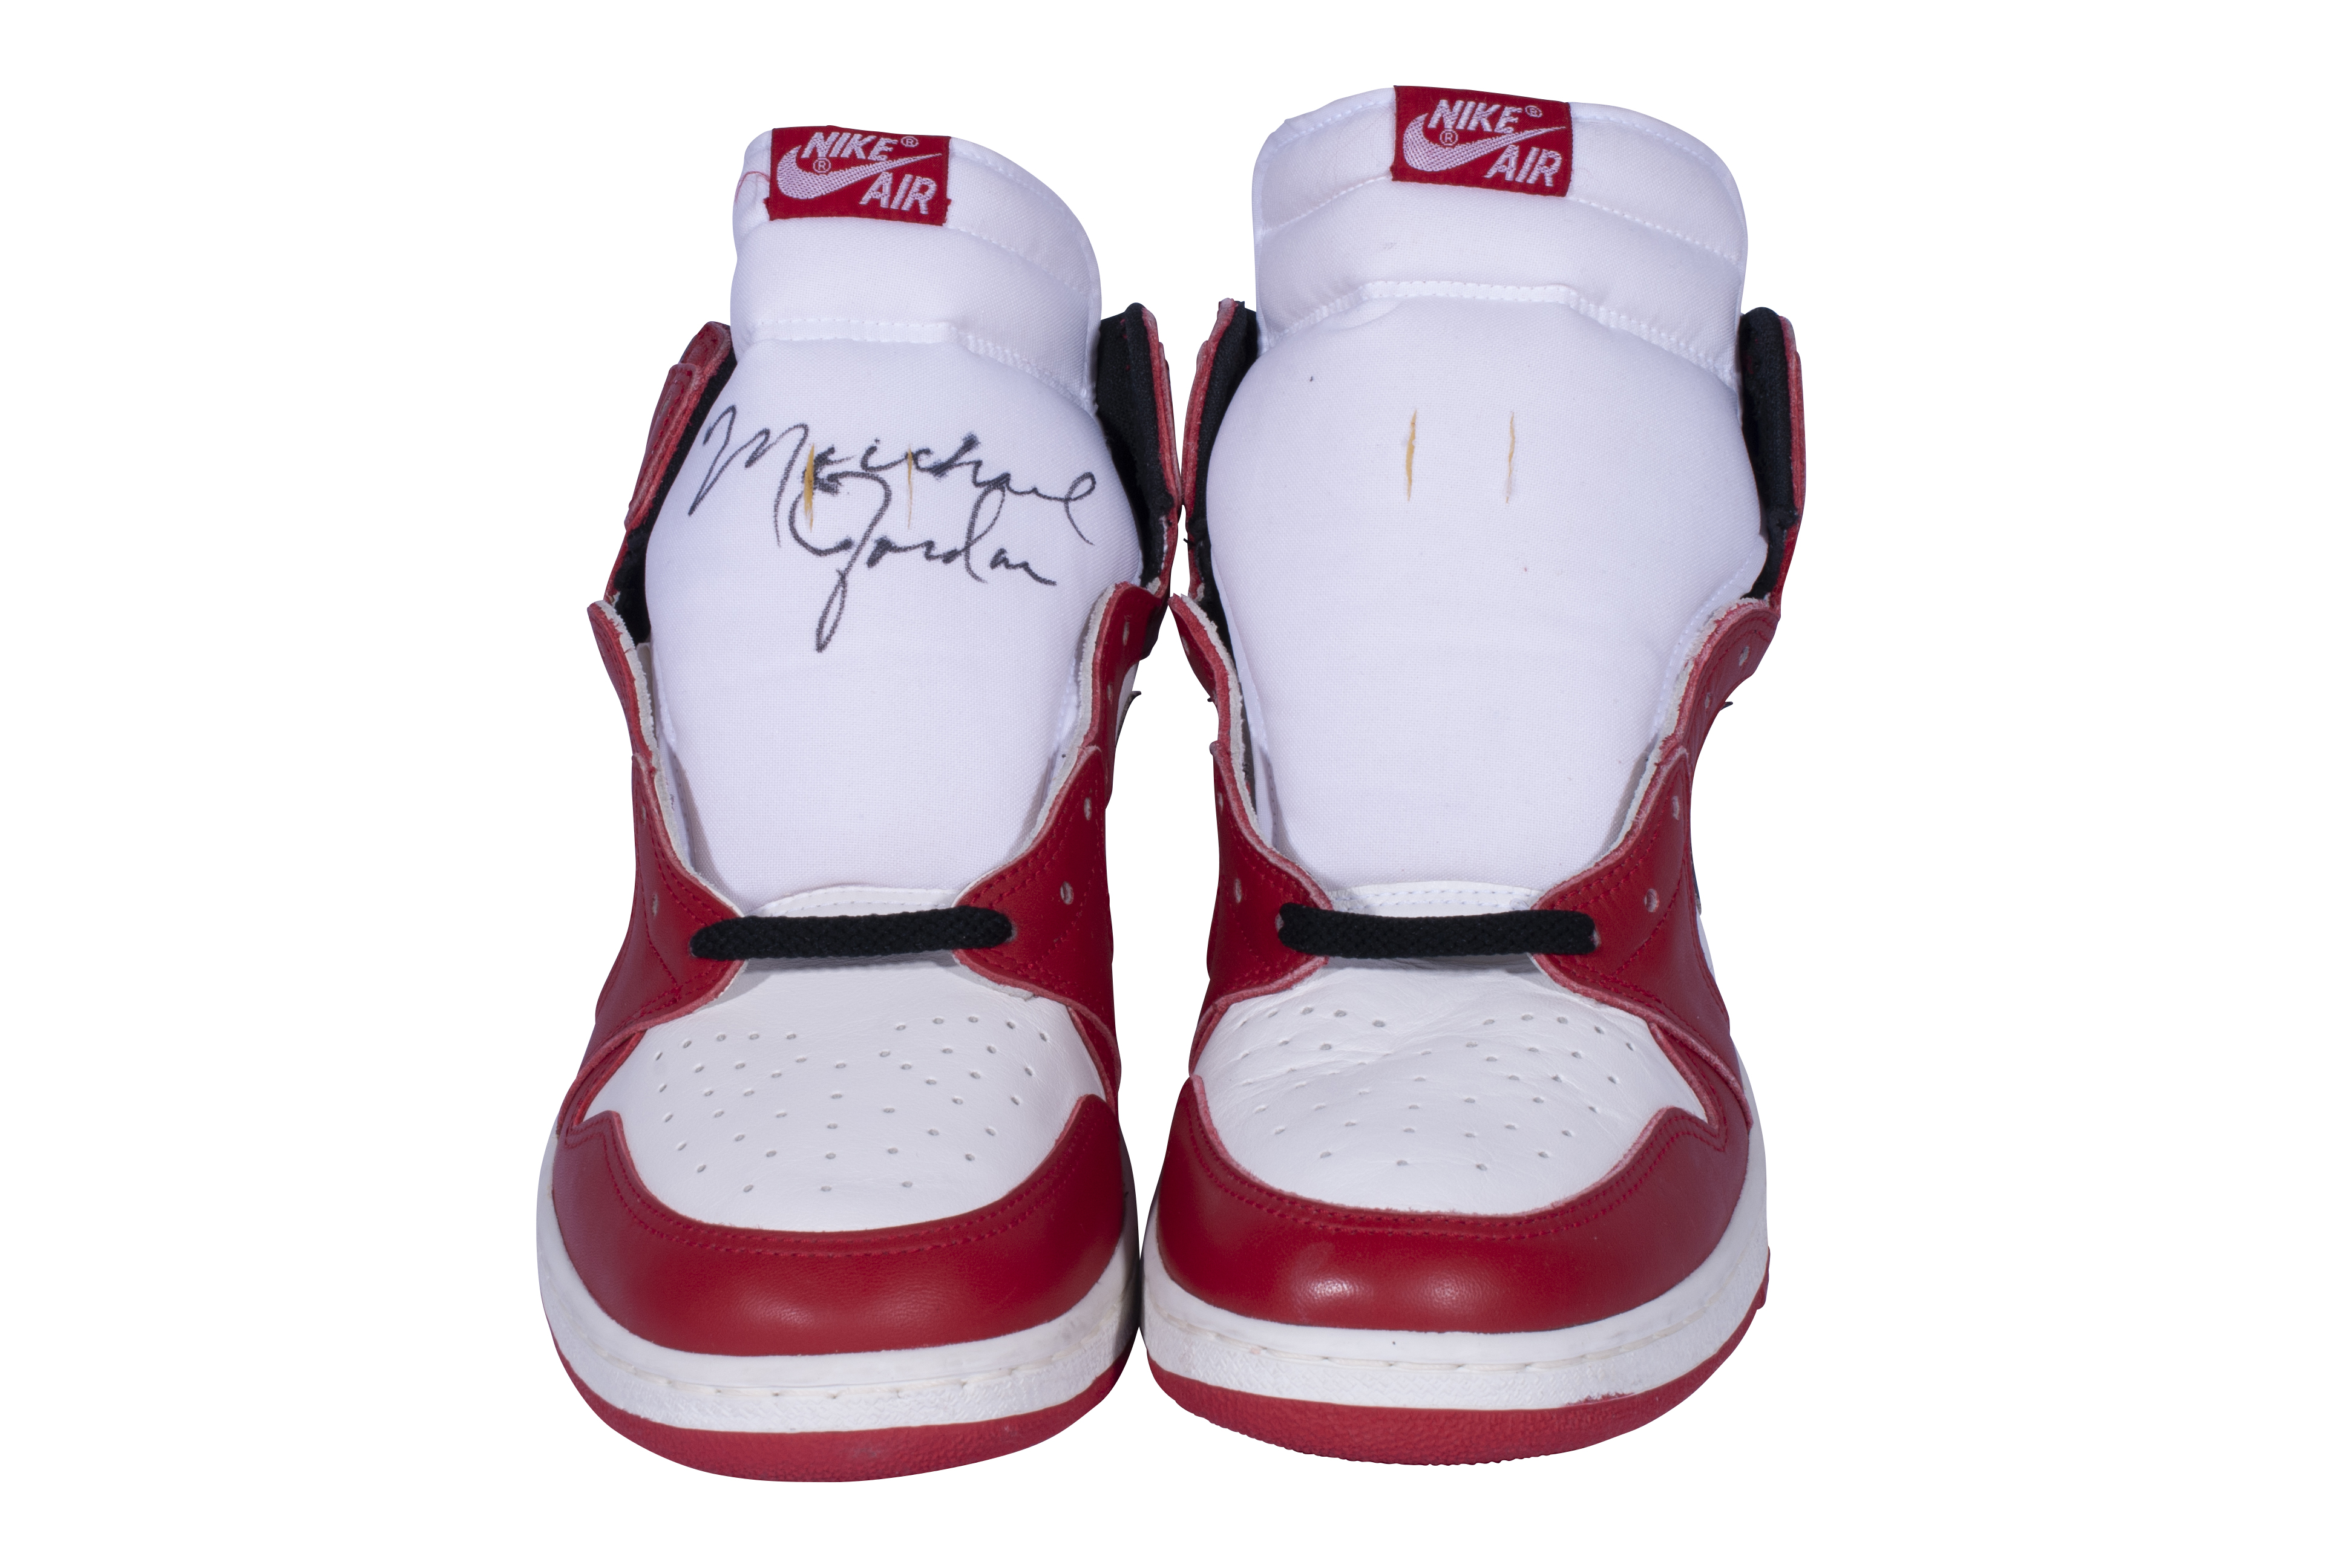 The Dynasty Collection: The Complete Set of Michael Jordan's 'Air